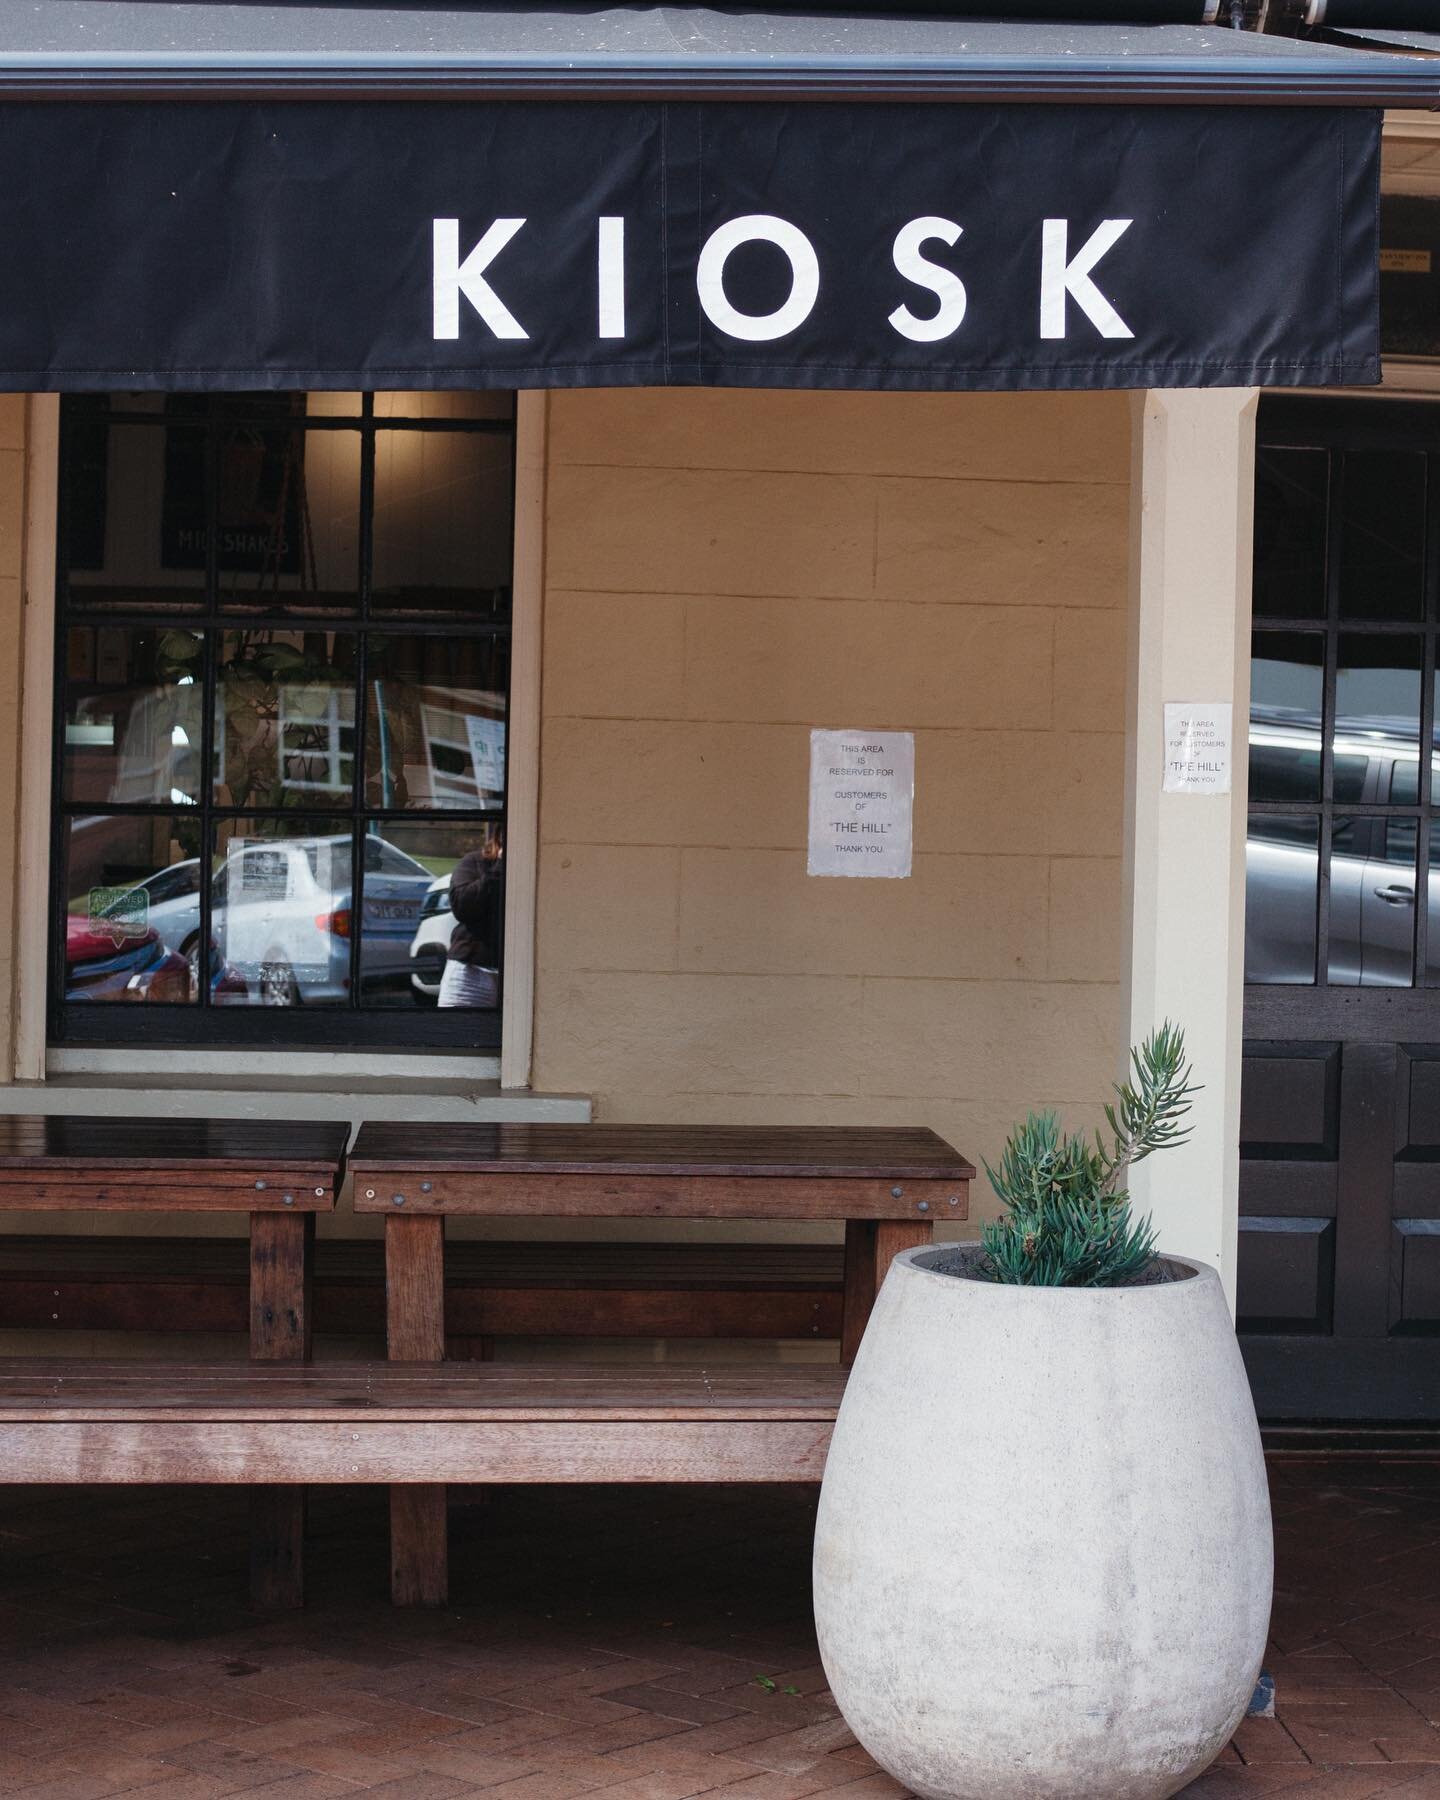 Here all weekend for your coffee and takeaway needs ☕️

#thehillkiosk #gerringong #southcoastcafe #southcoastnsw #nswsouthcoast #beverages #drinks  #supportlocal #freshjuice #southcoastcoffee #southcoasttakeaway #destinationnsw #supportsmallbusiness 